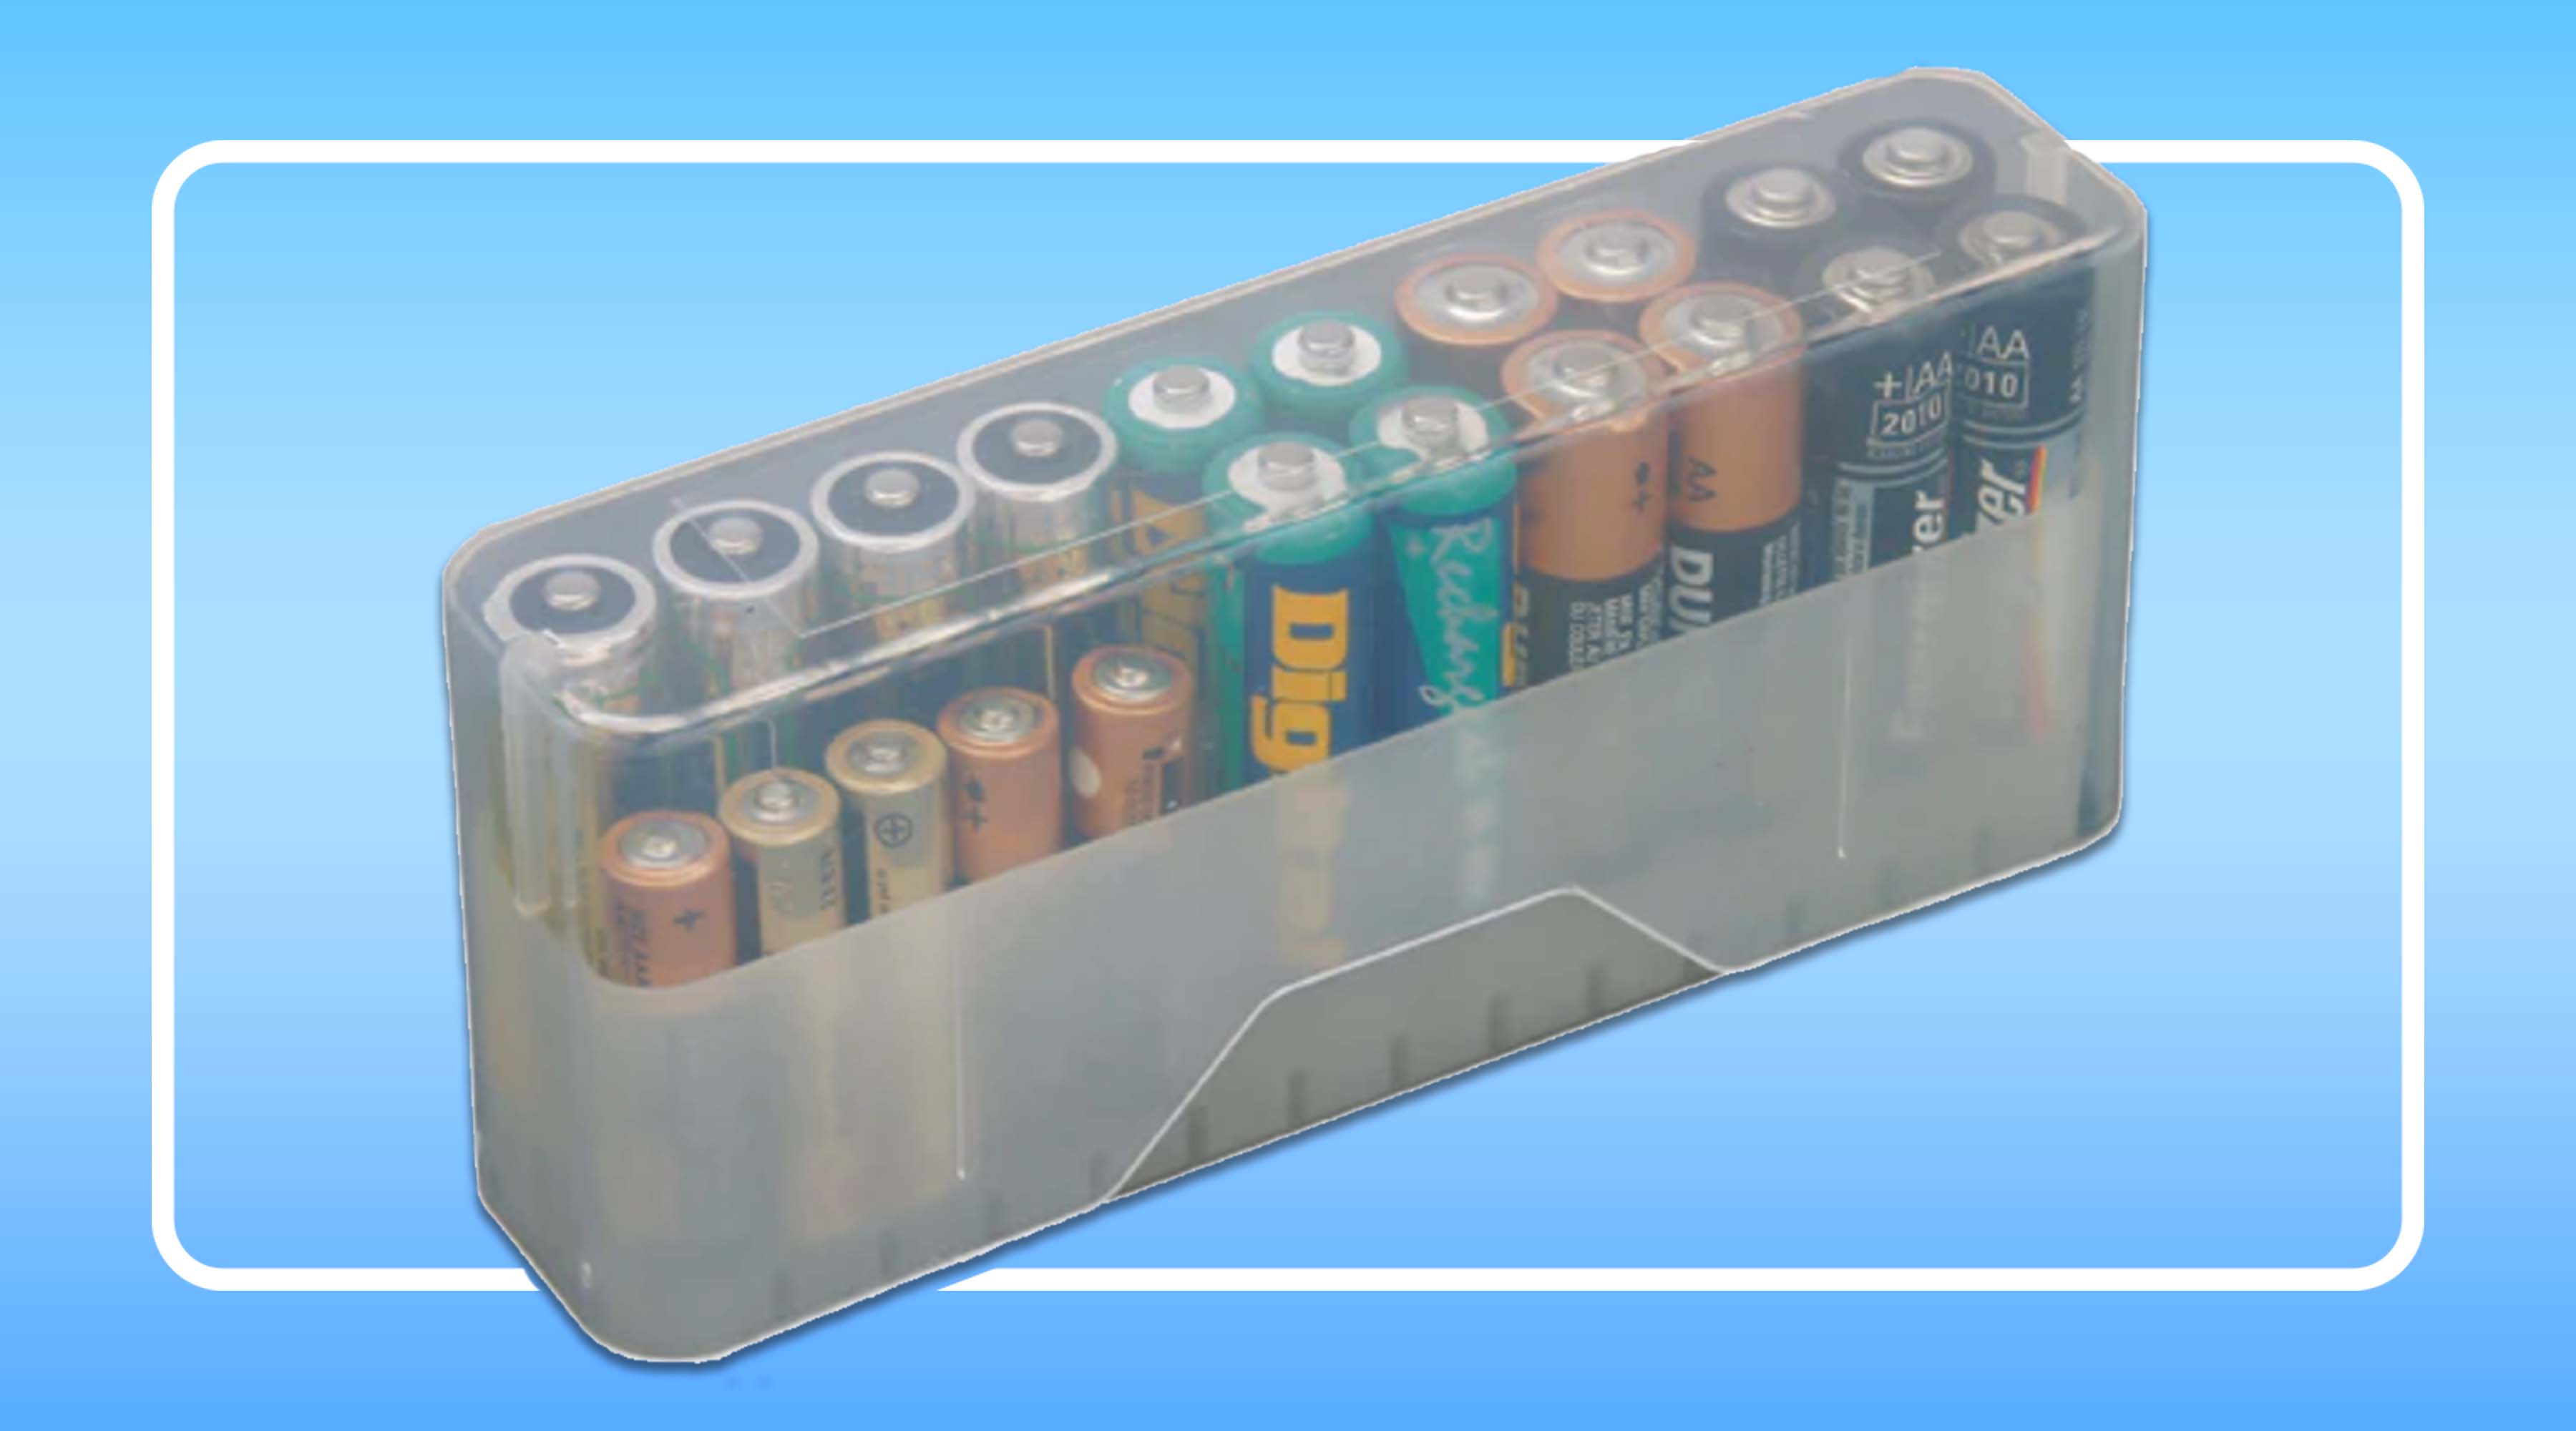 MTM Battery Boxes - The Unofficial Guide